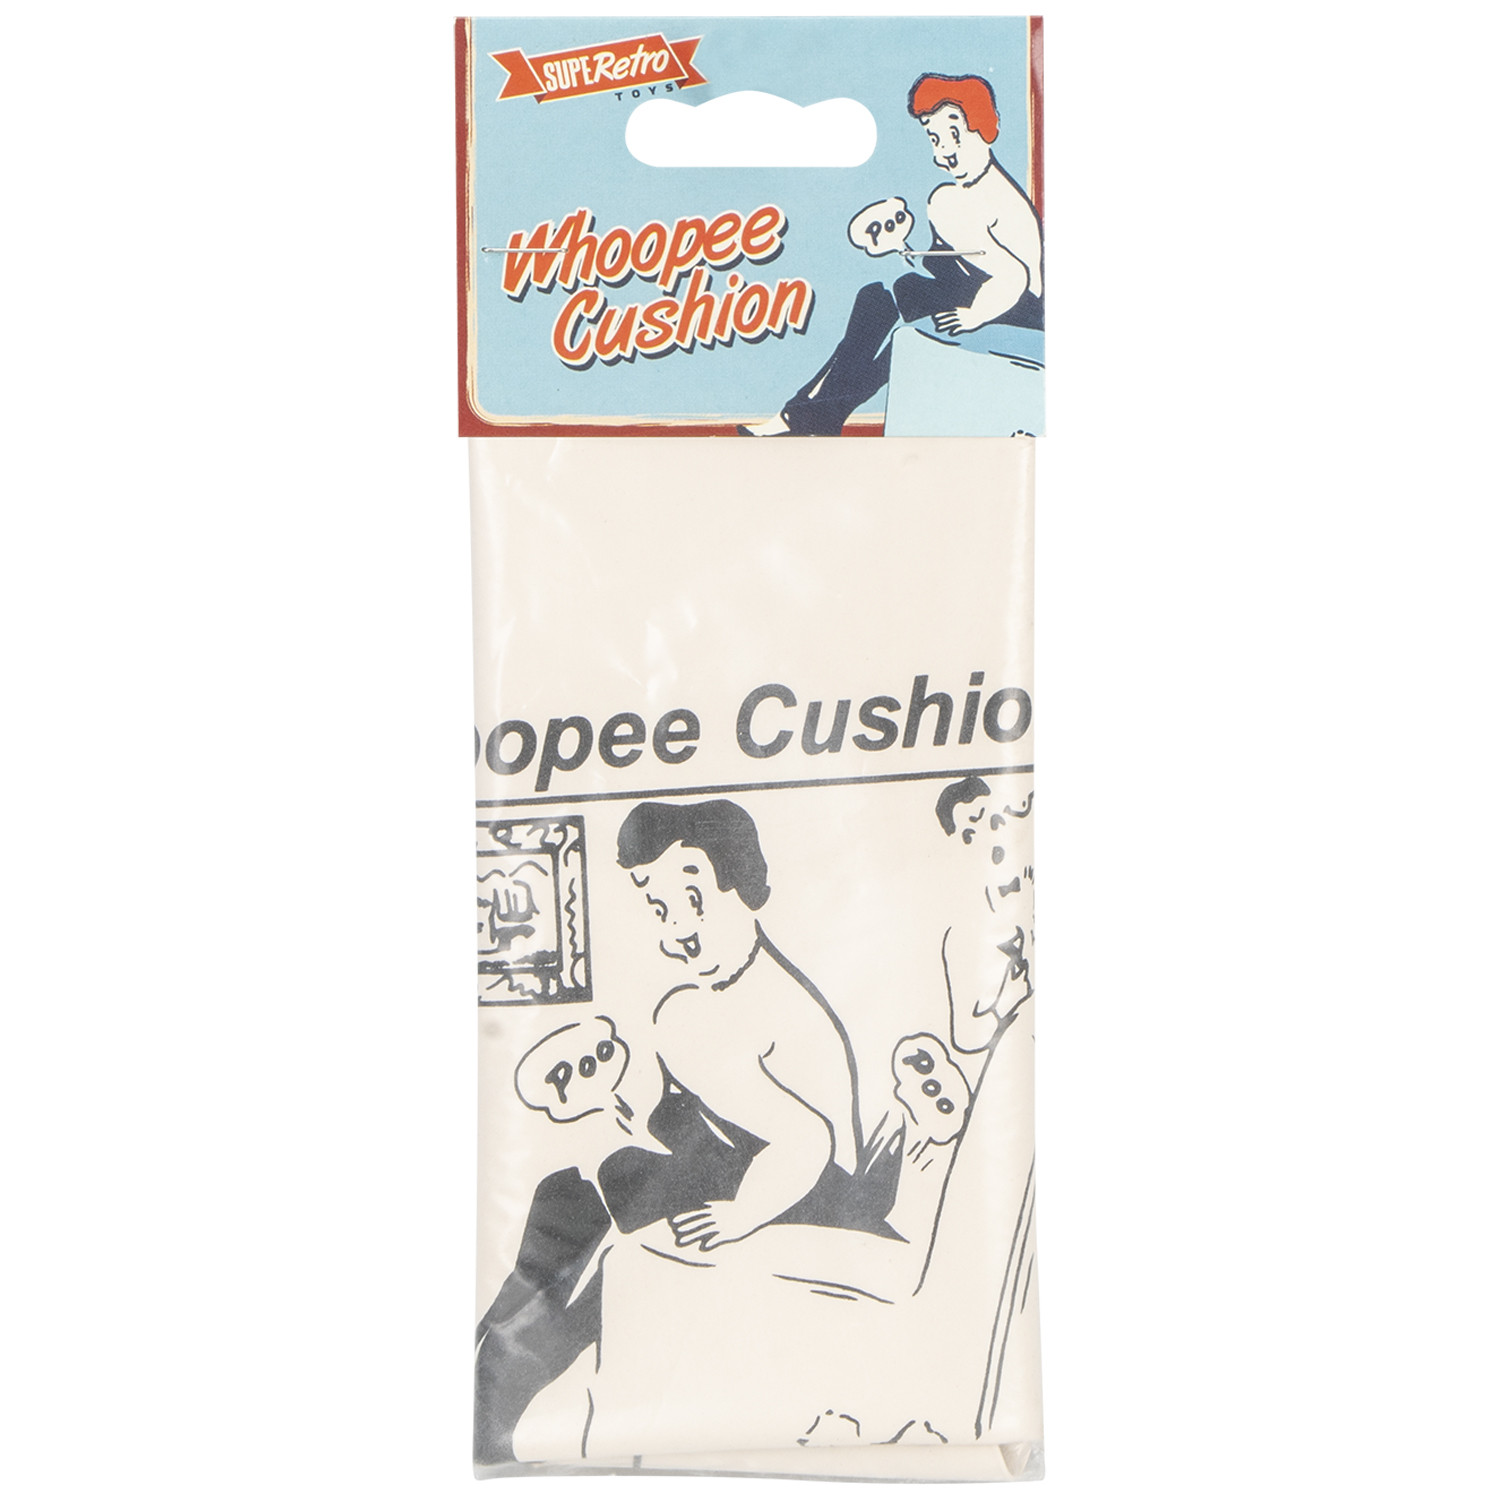 Single Super Retro Whoopee Cushion in Assorted styles Image 1